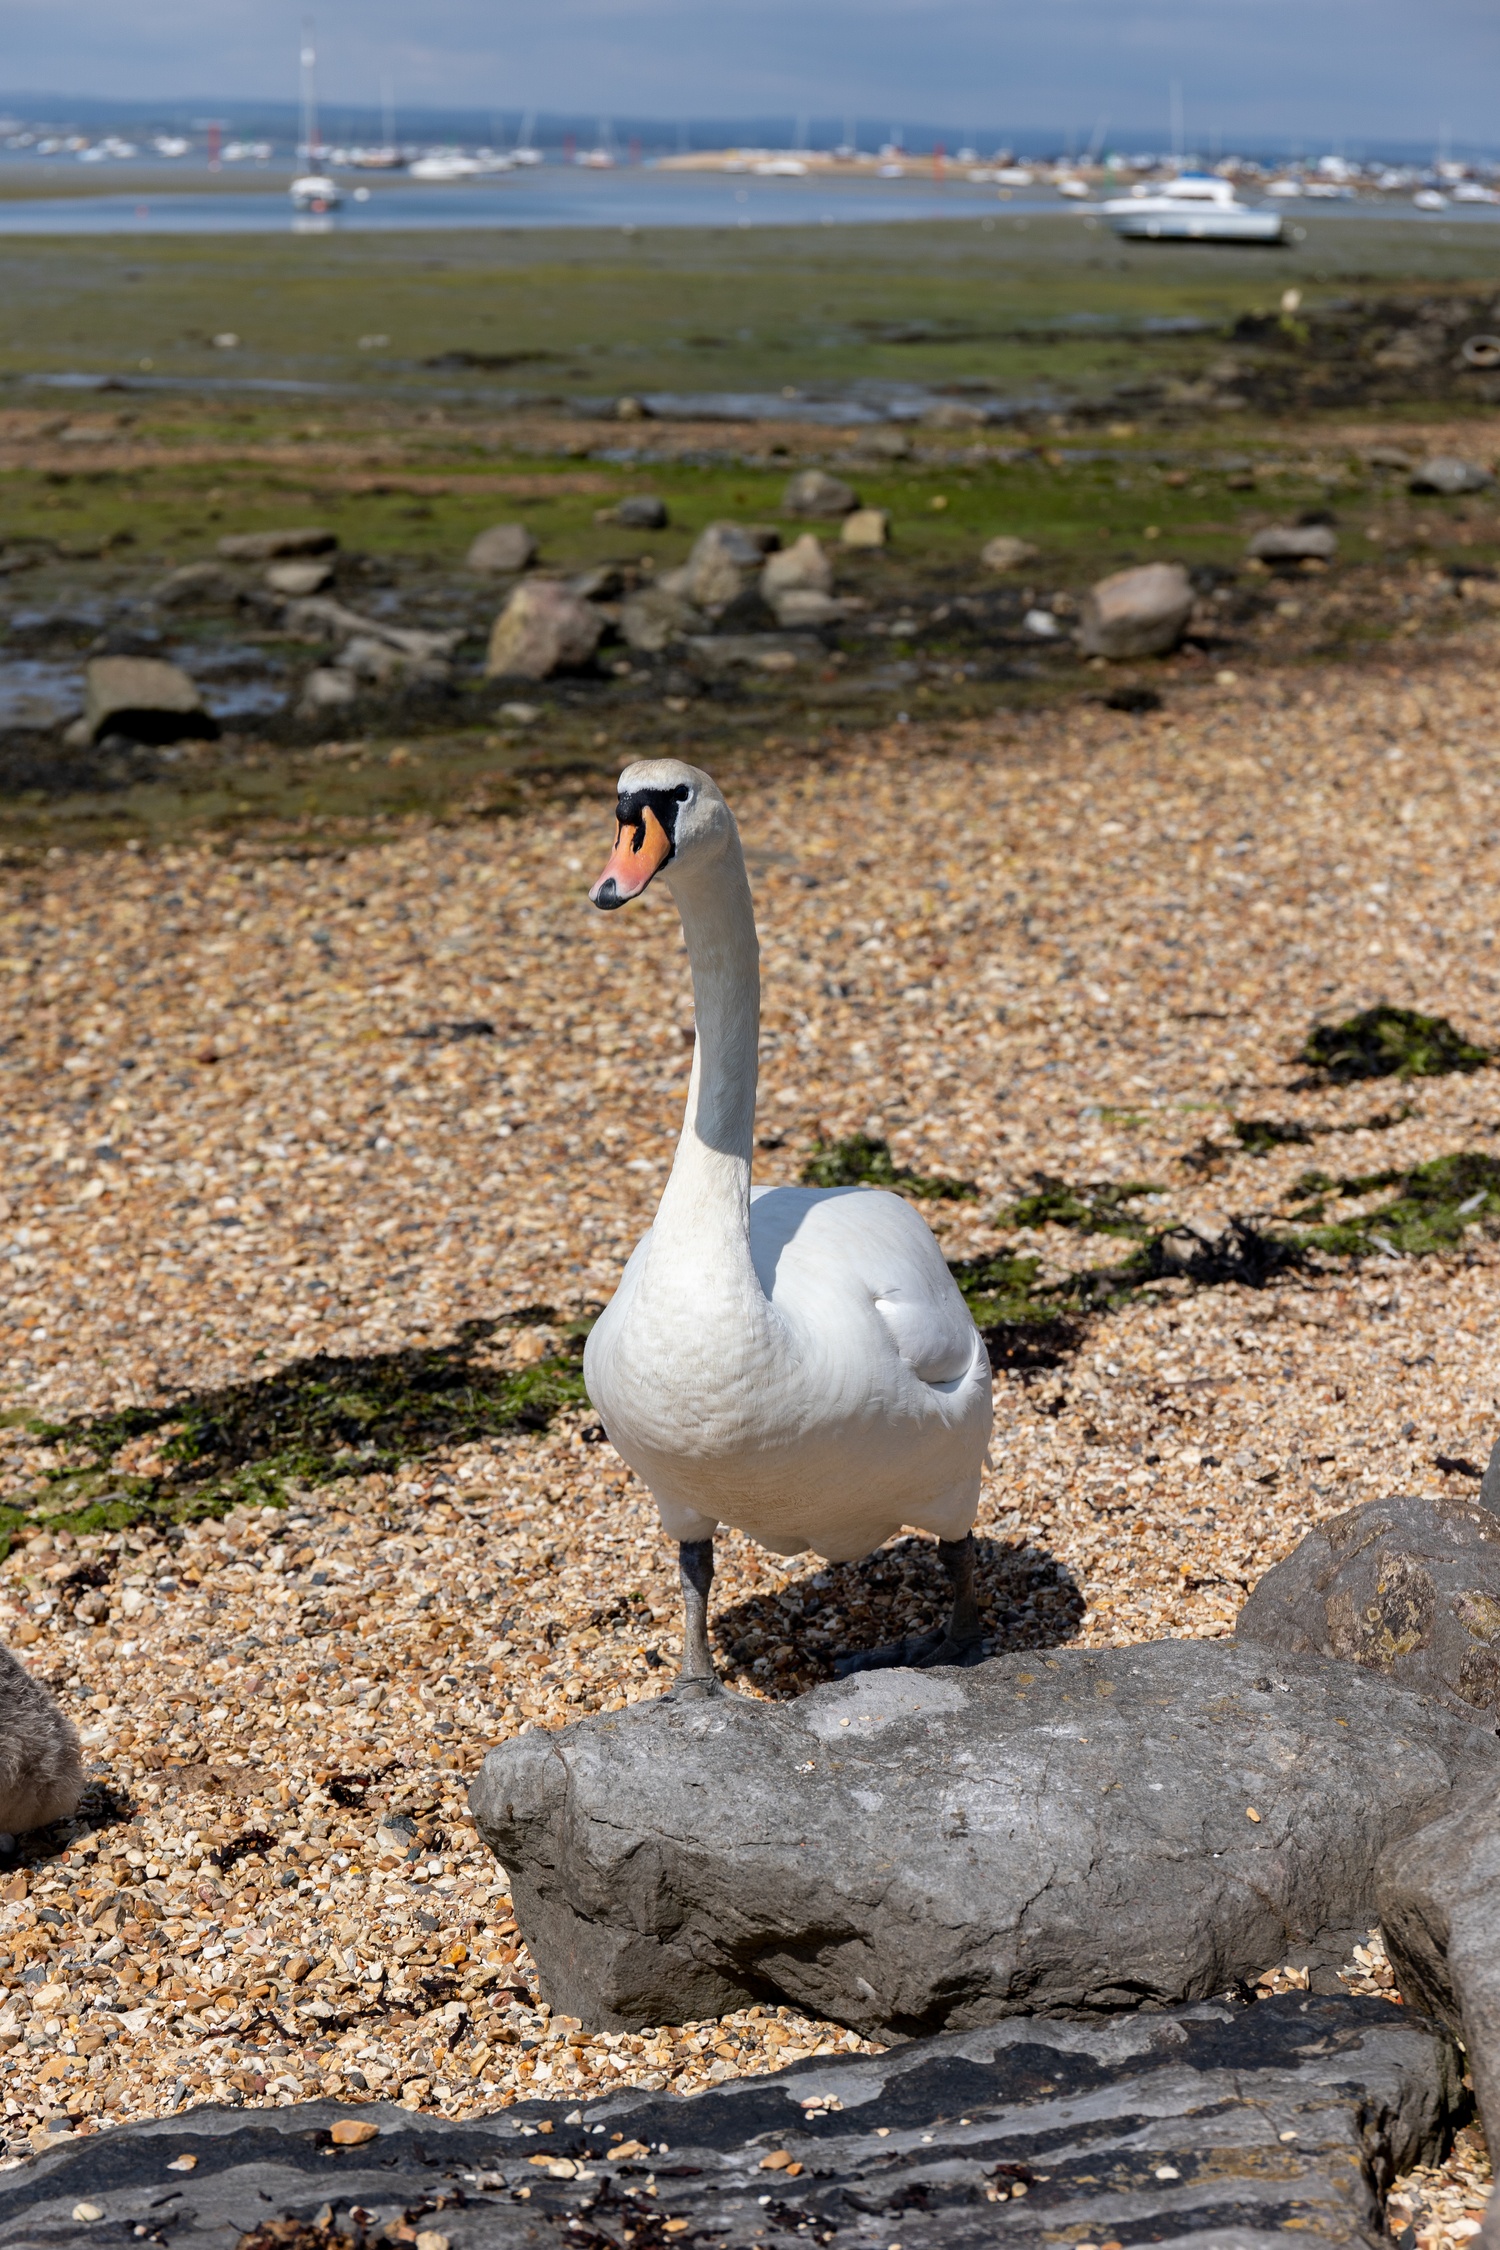 A swan walking on rocky beach towards the camera watching us and its cygnets